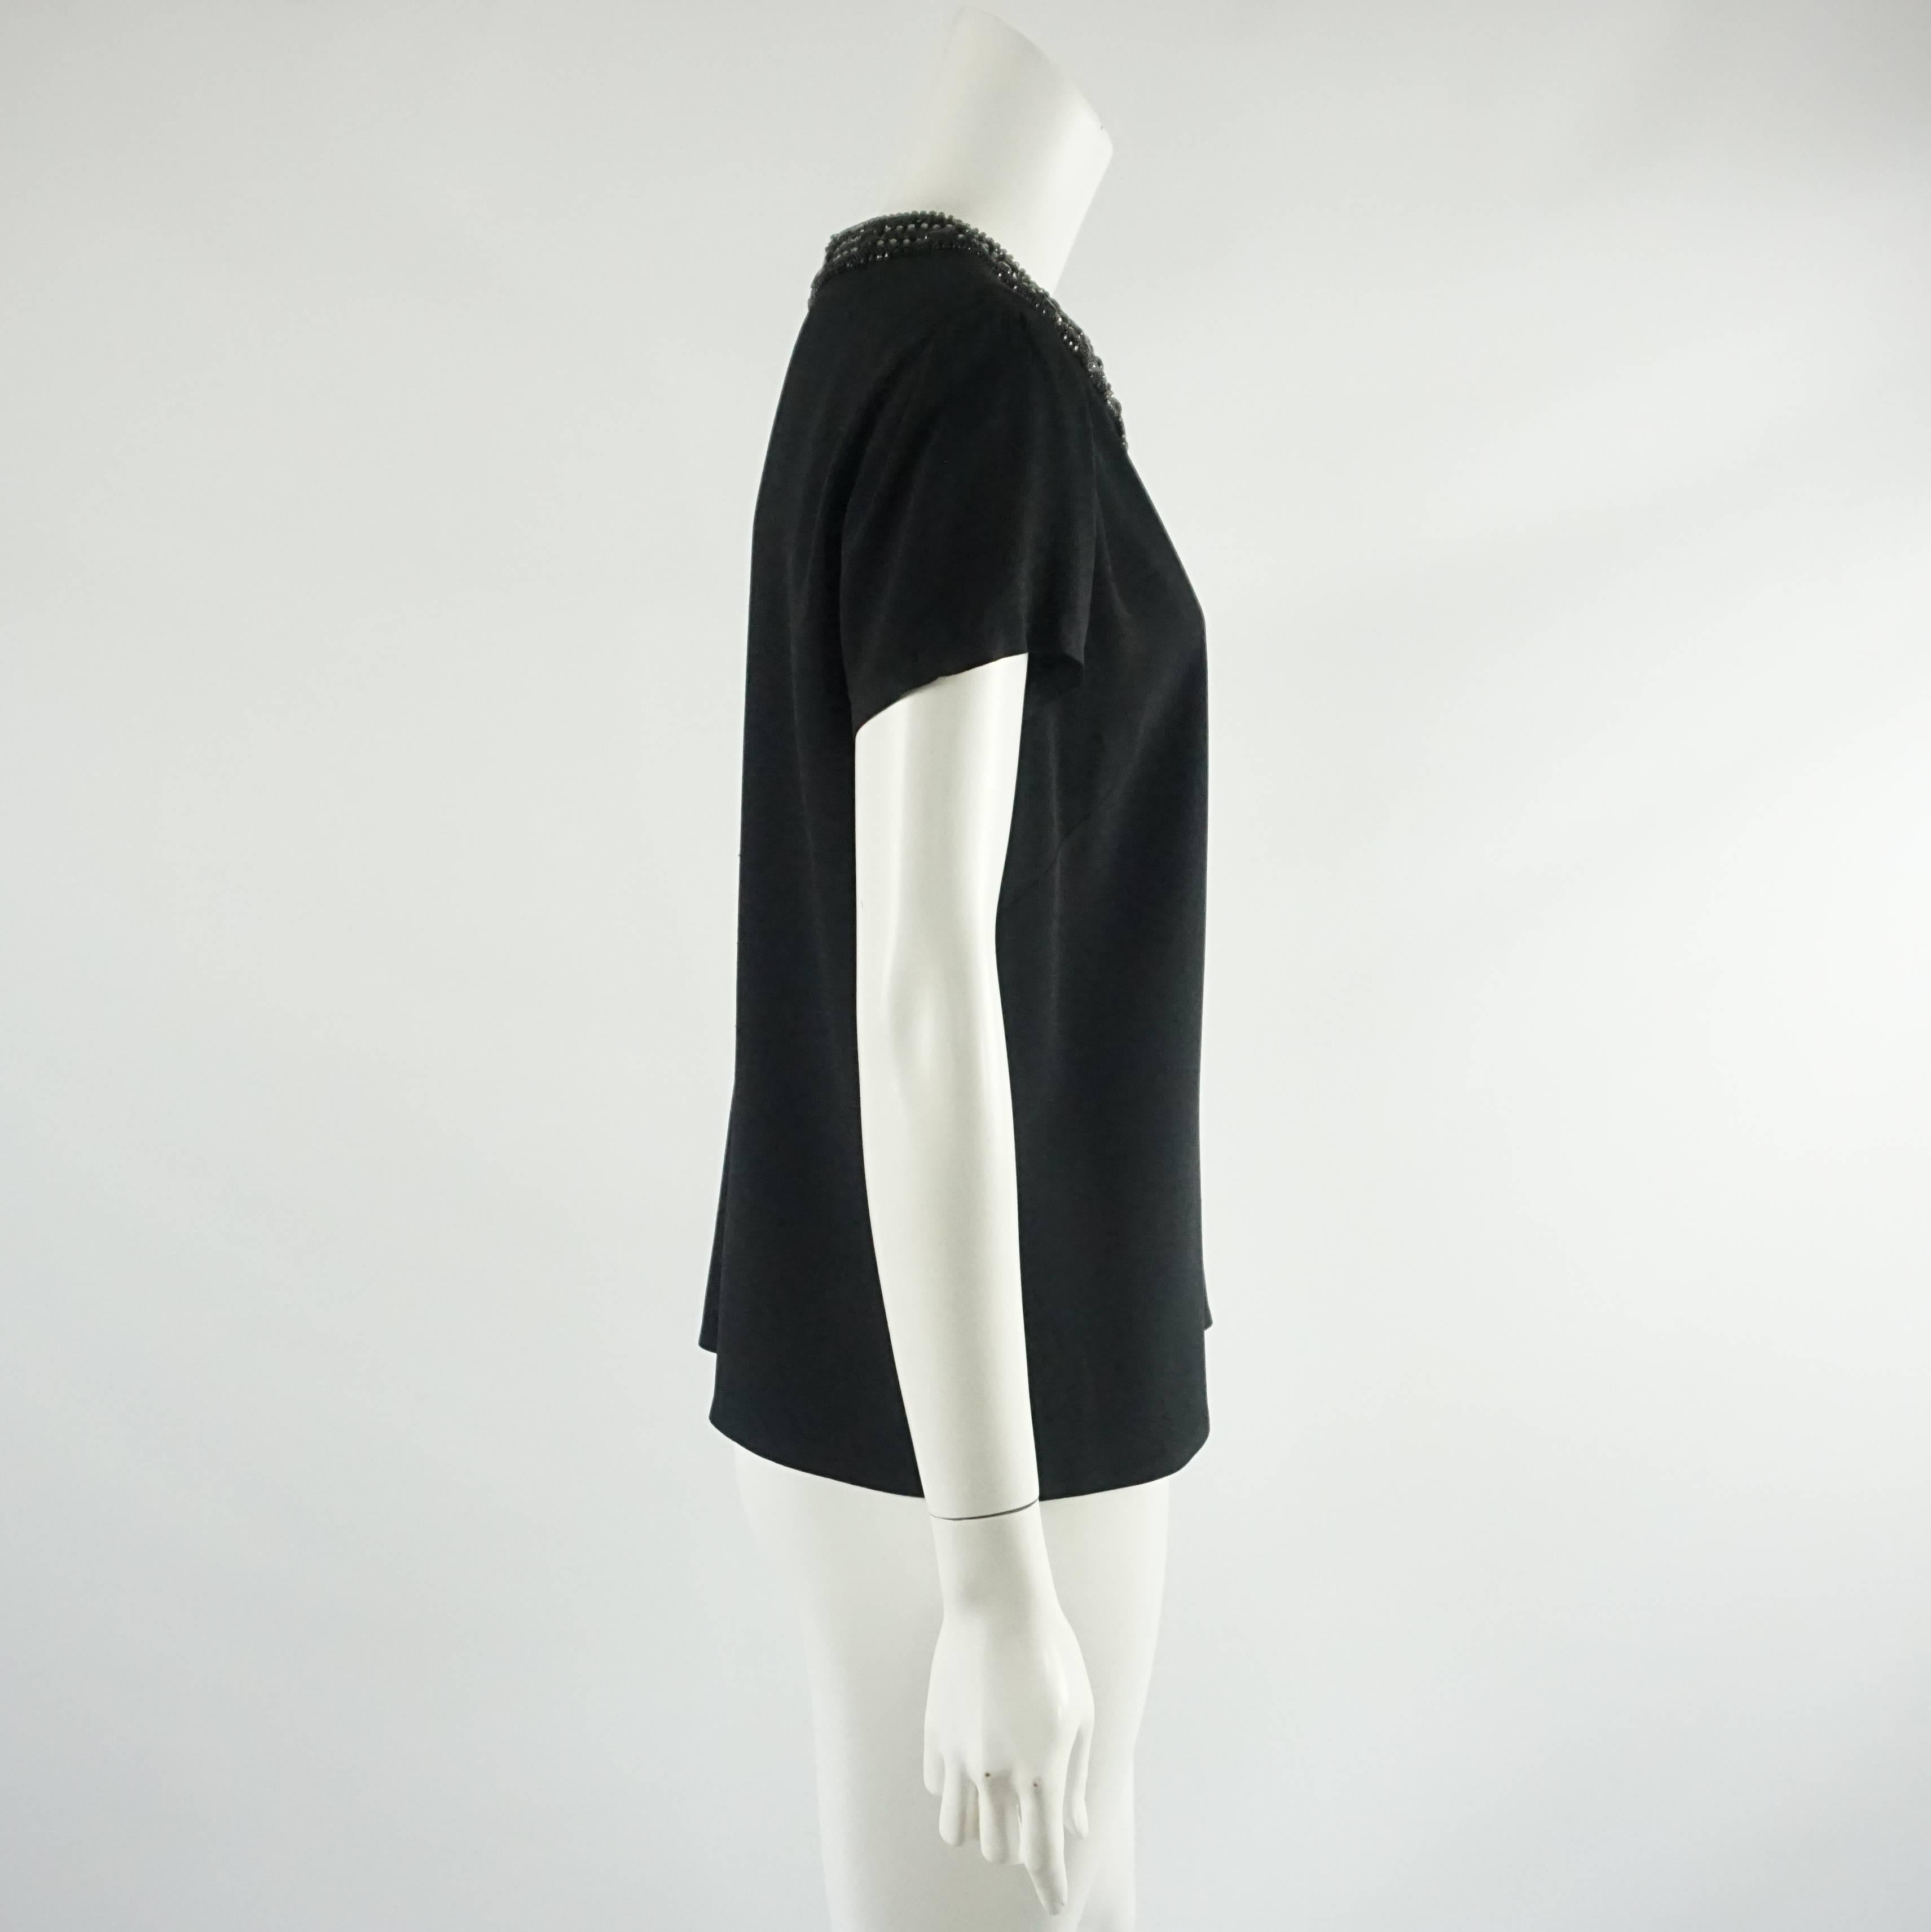 This Ralph Lauren Black Label top is short sleeved. It has a heavily beaded neckline. This top is in excellent condition. Size 10.

Measurements
Shoulder to Shoulder: 16.25